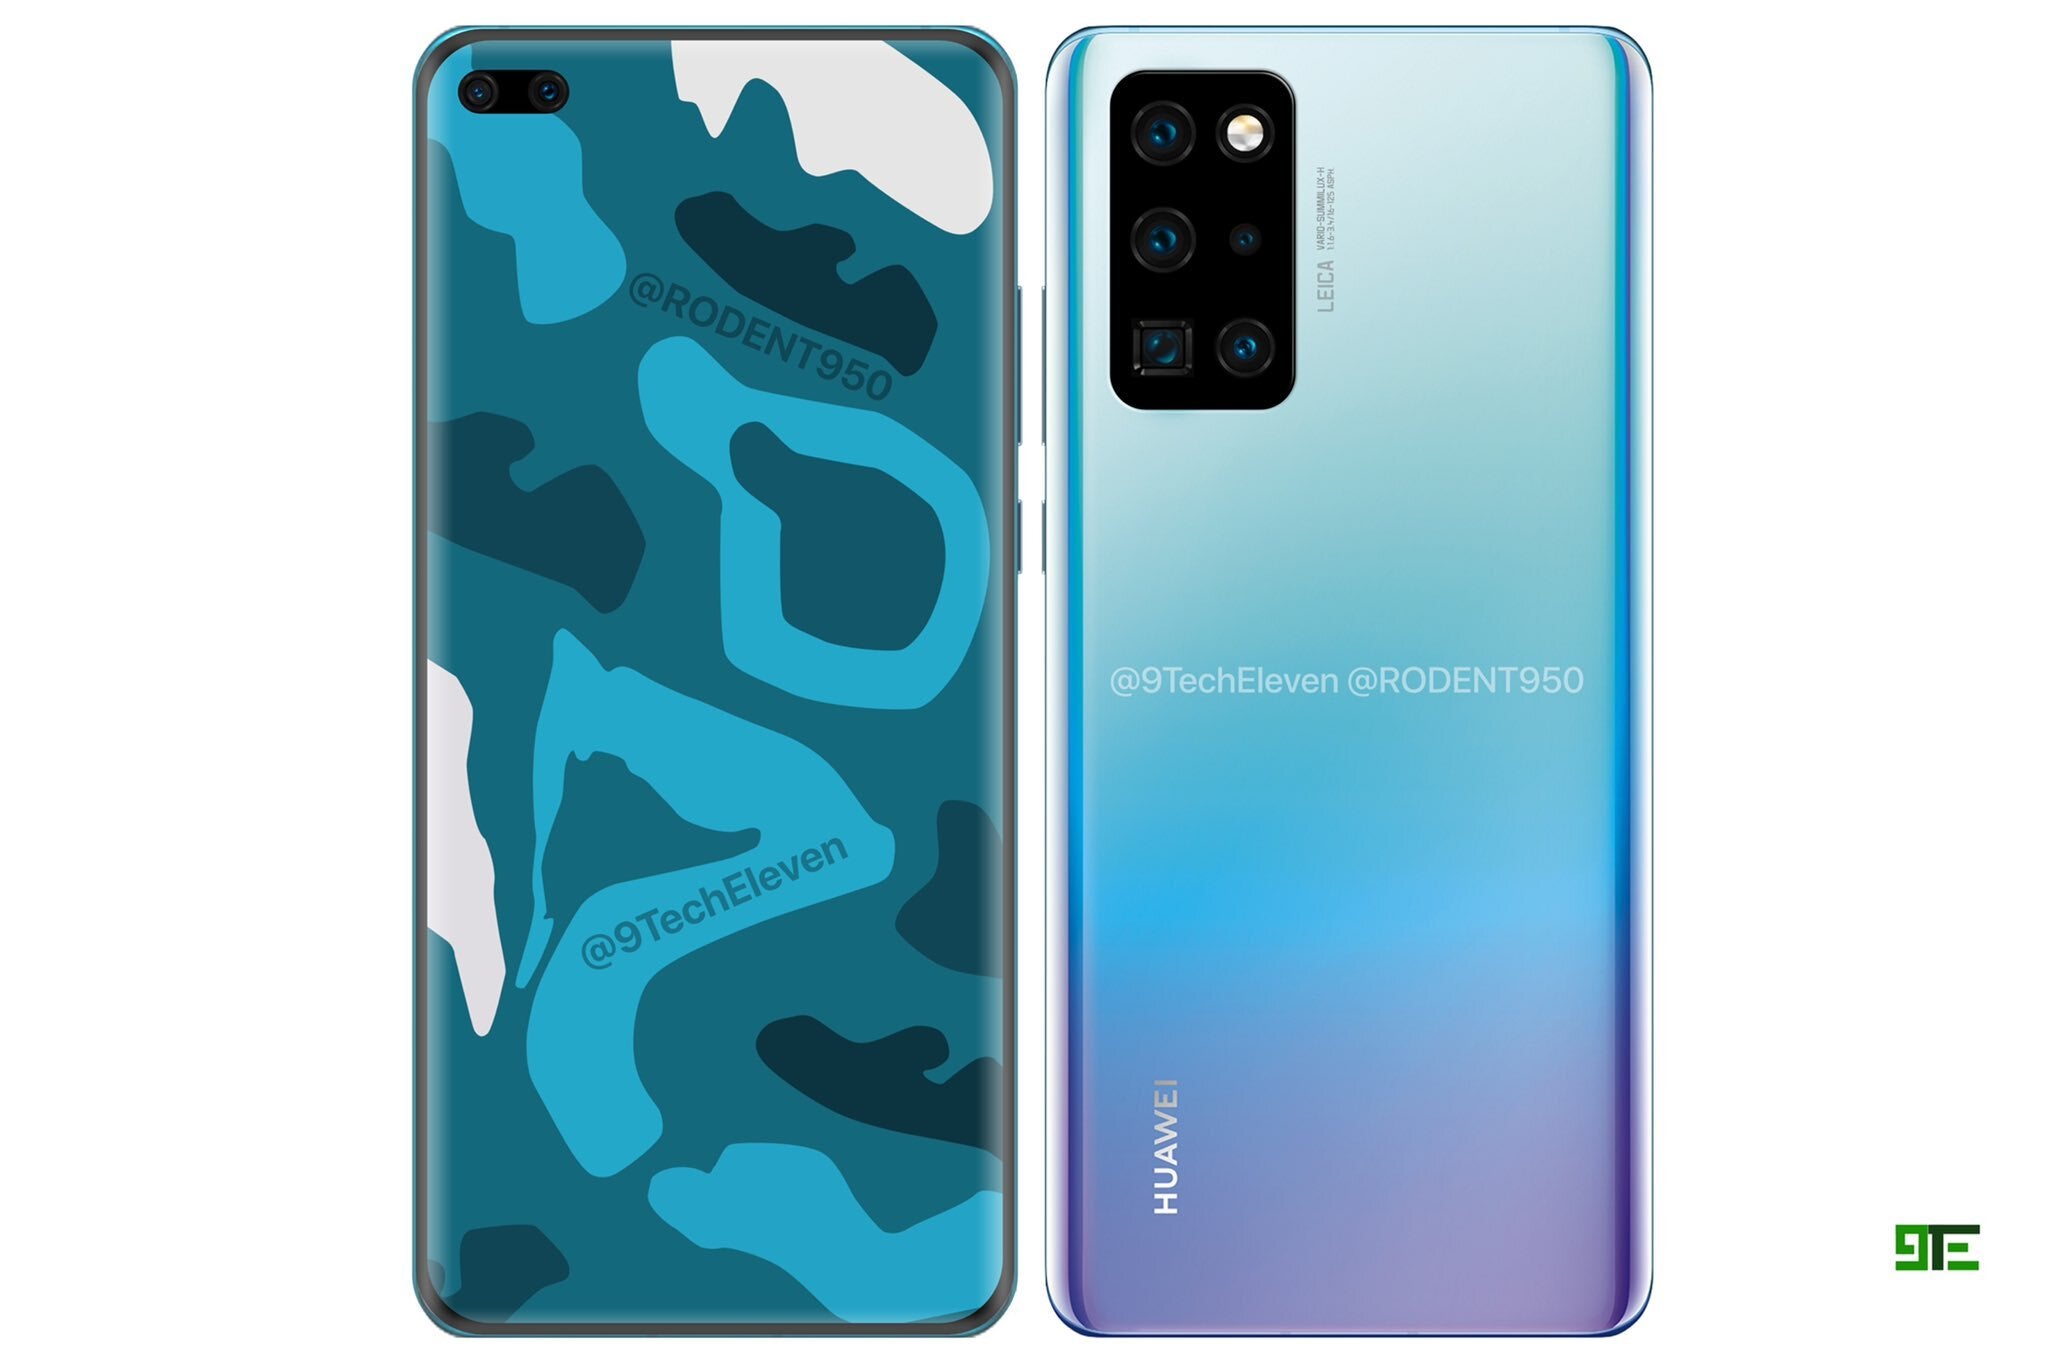 These Huawei P40 Pro renders give us our best look yet at the flagship